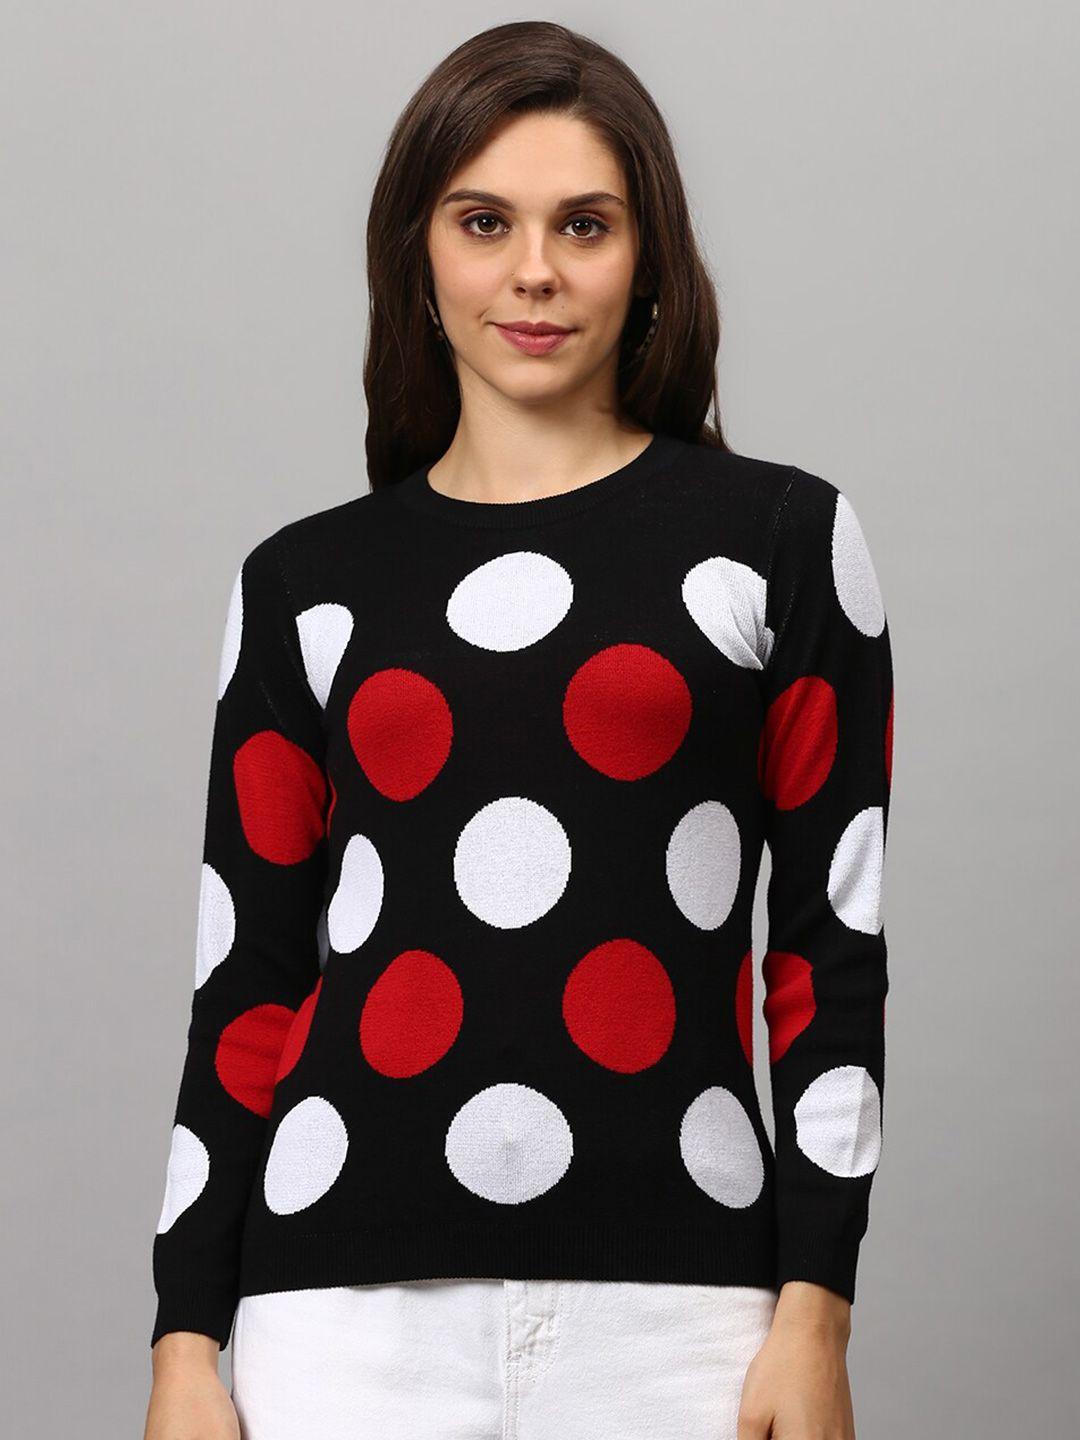 campus-sutra-women-black-&-white-printed-pullover